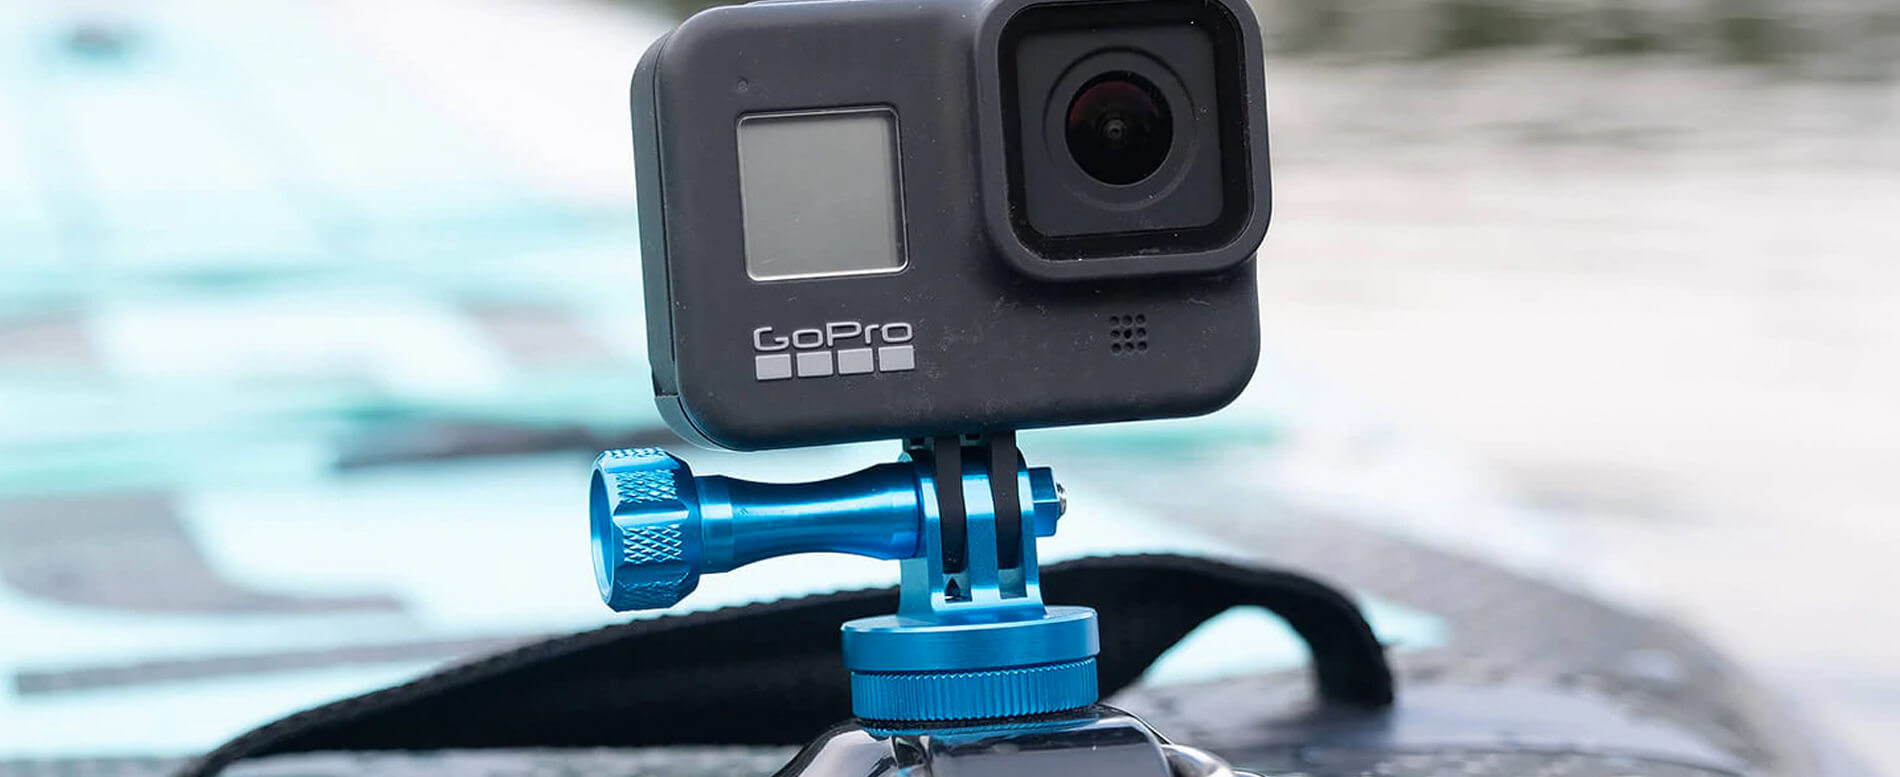 How To Install GoPro Surfboard Mount